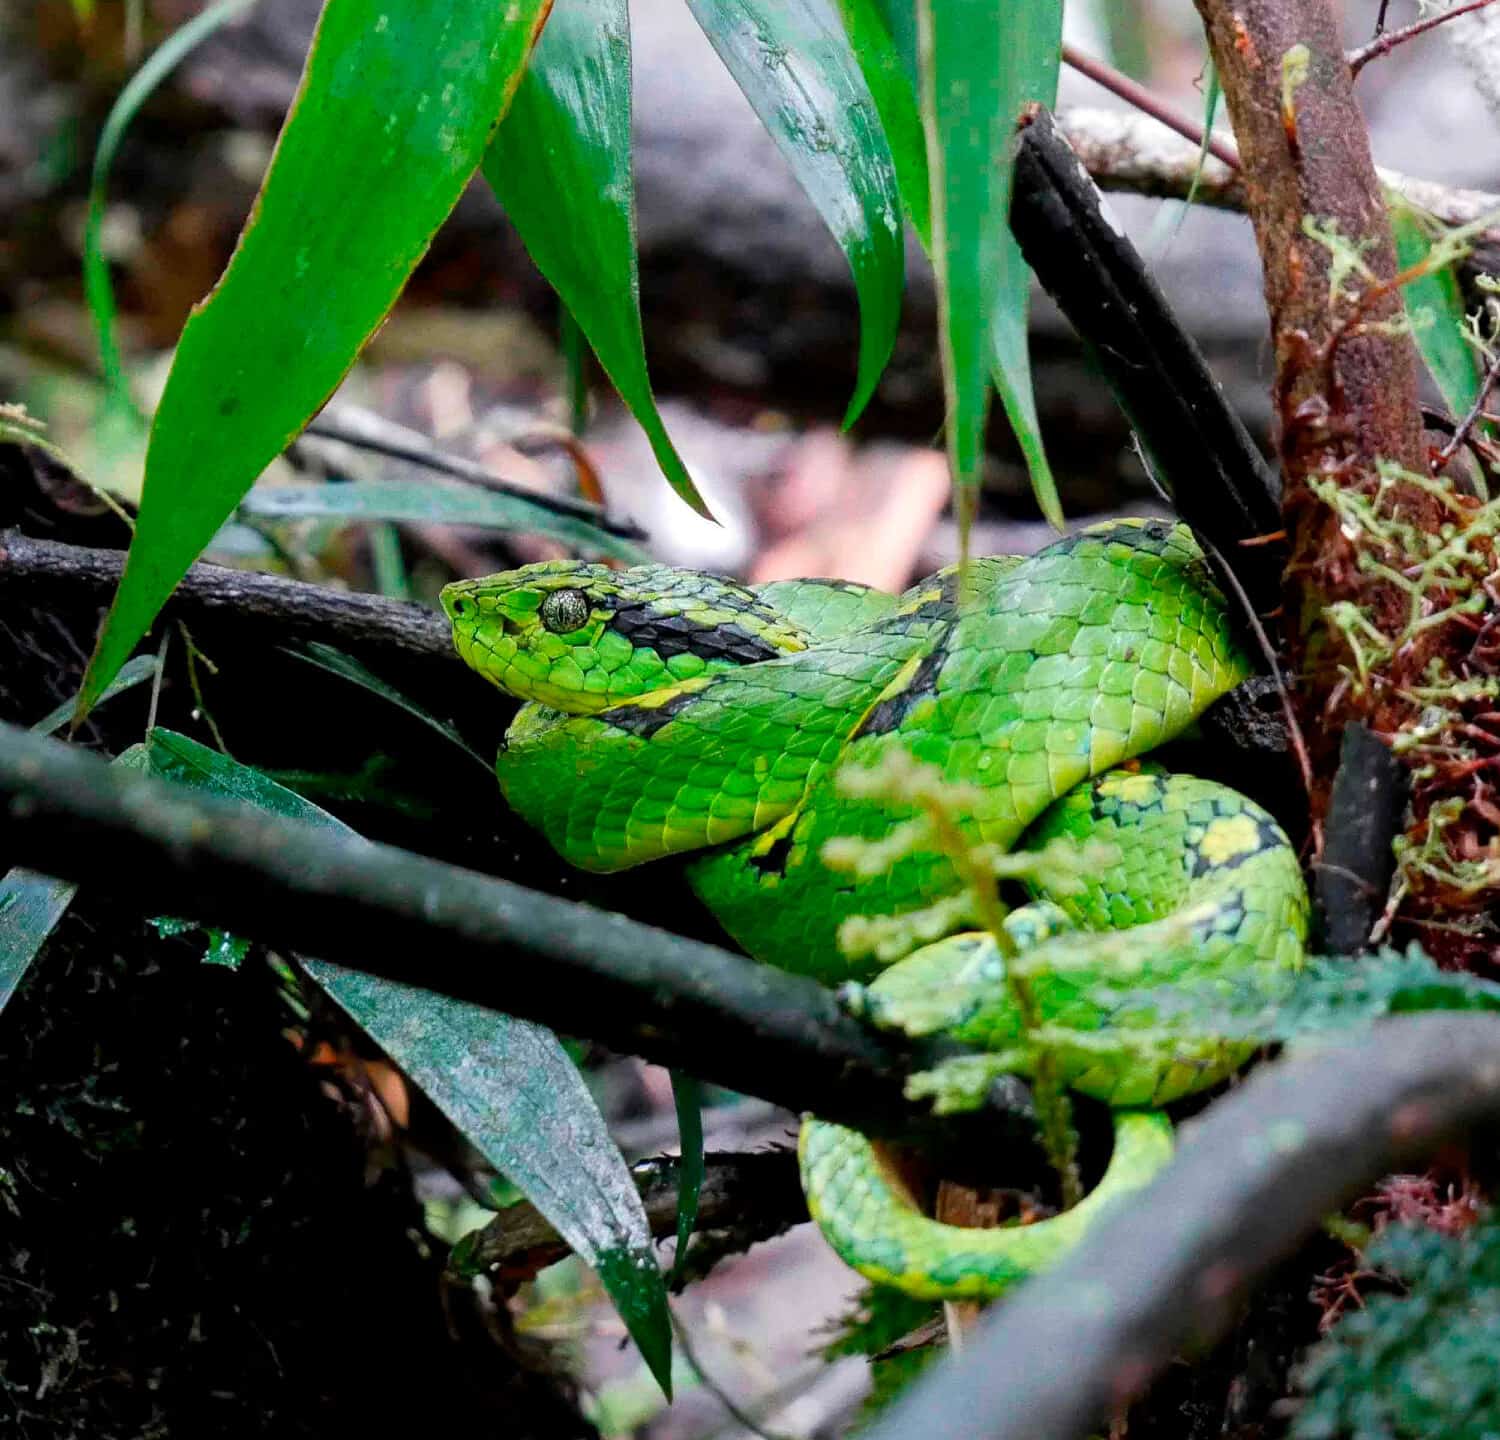 Beautiful Bothriechis aurifer, also called the Guatemalan palm viper or the Yellow-blotched palm pit viper, a venomous pit viper, found in the cloud forest of Guatemala